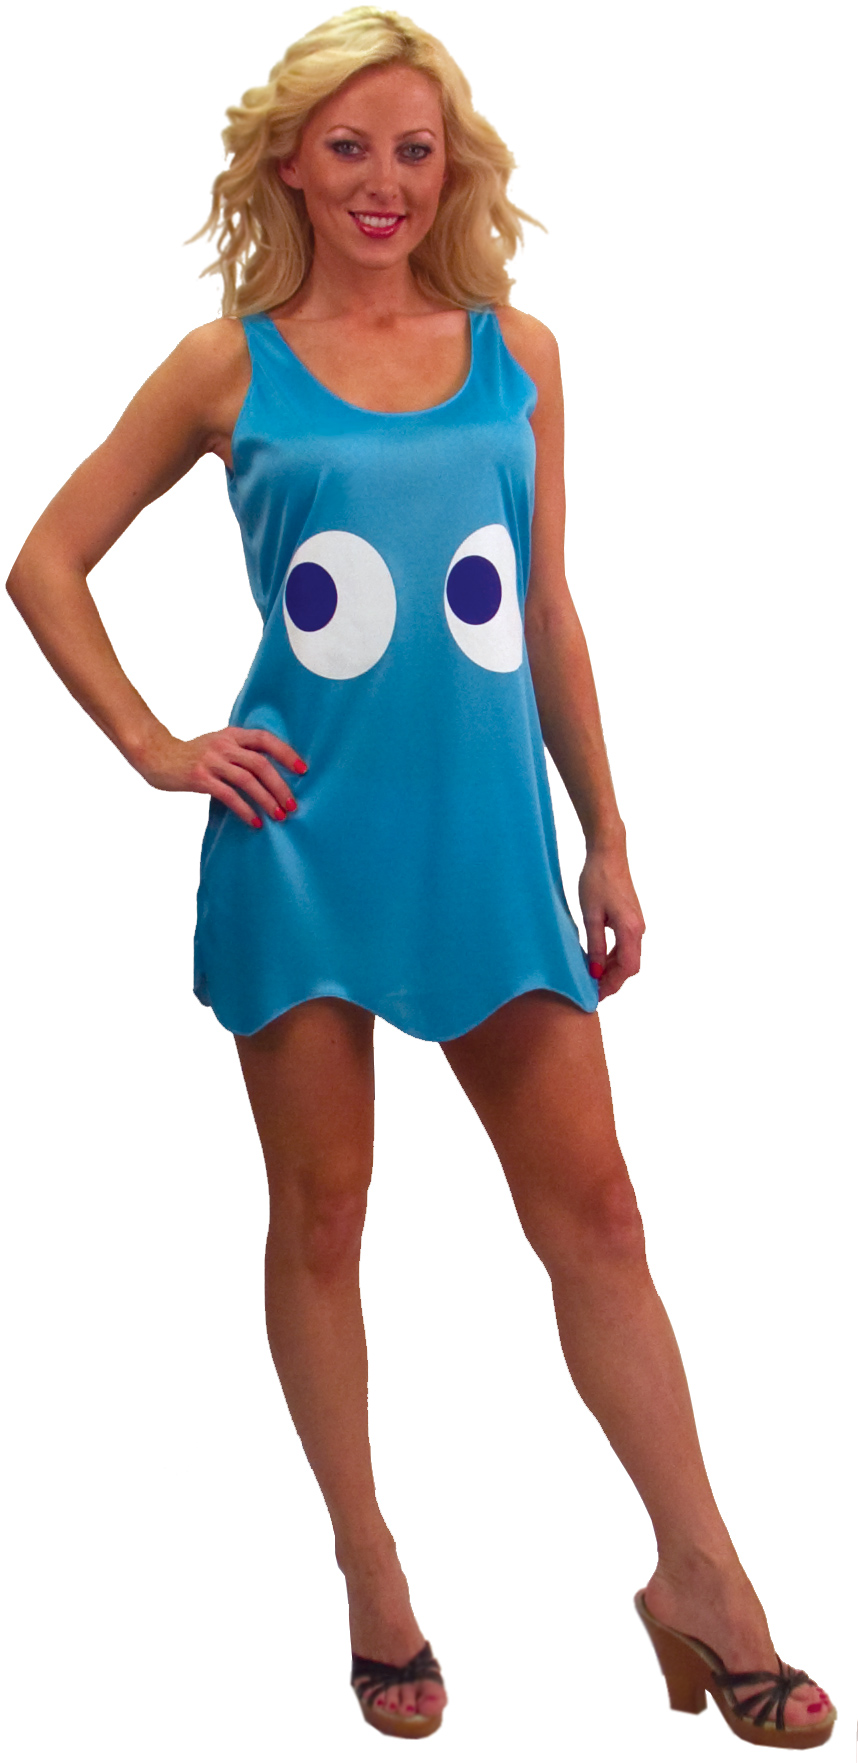 InCogneato Women's Pac-Man Inky Deluxe Tank Dress Adult Costume - Blue - Standard (One Size)